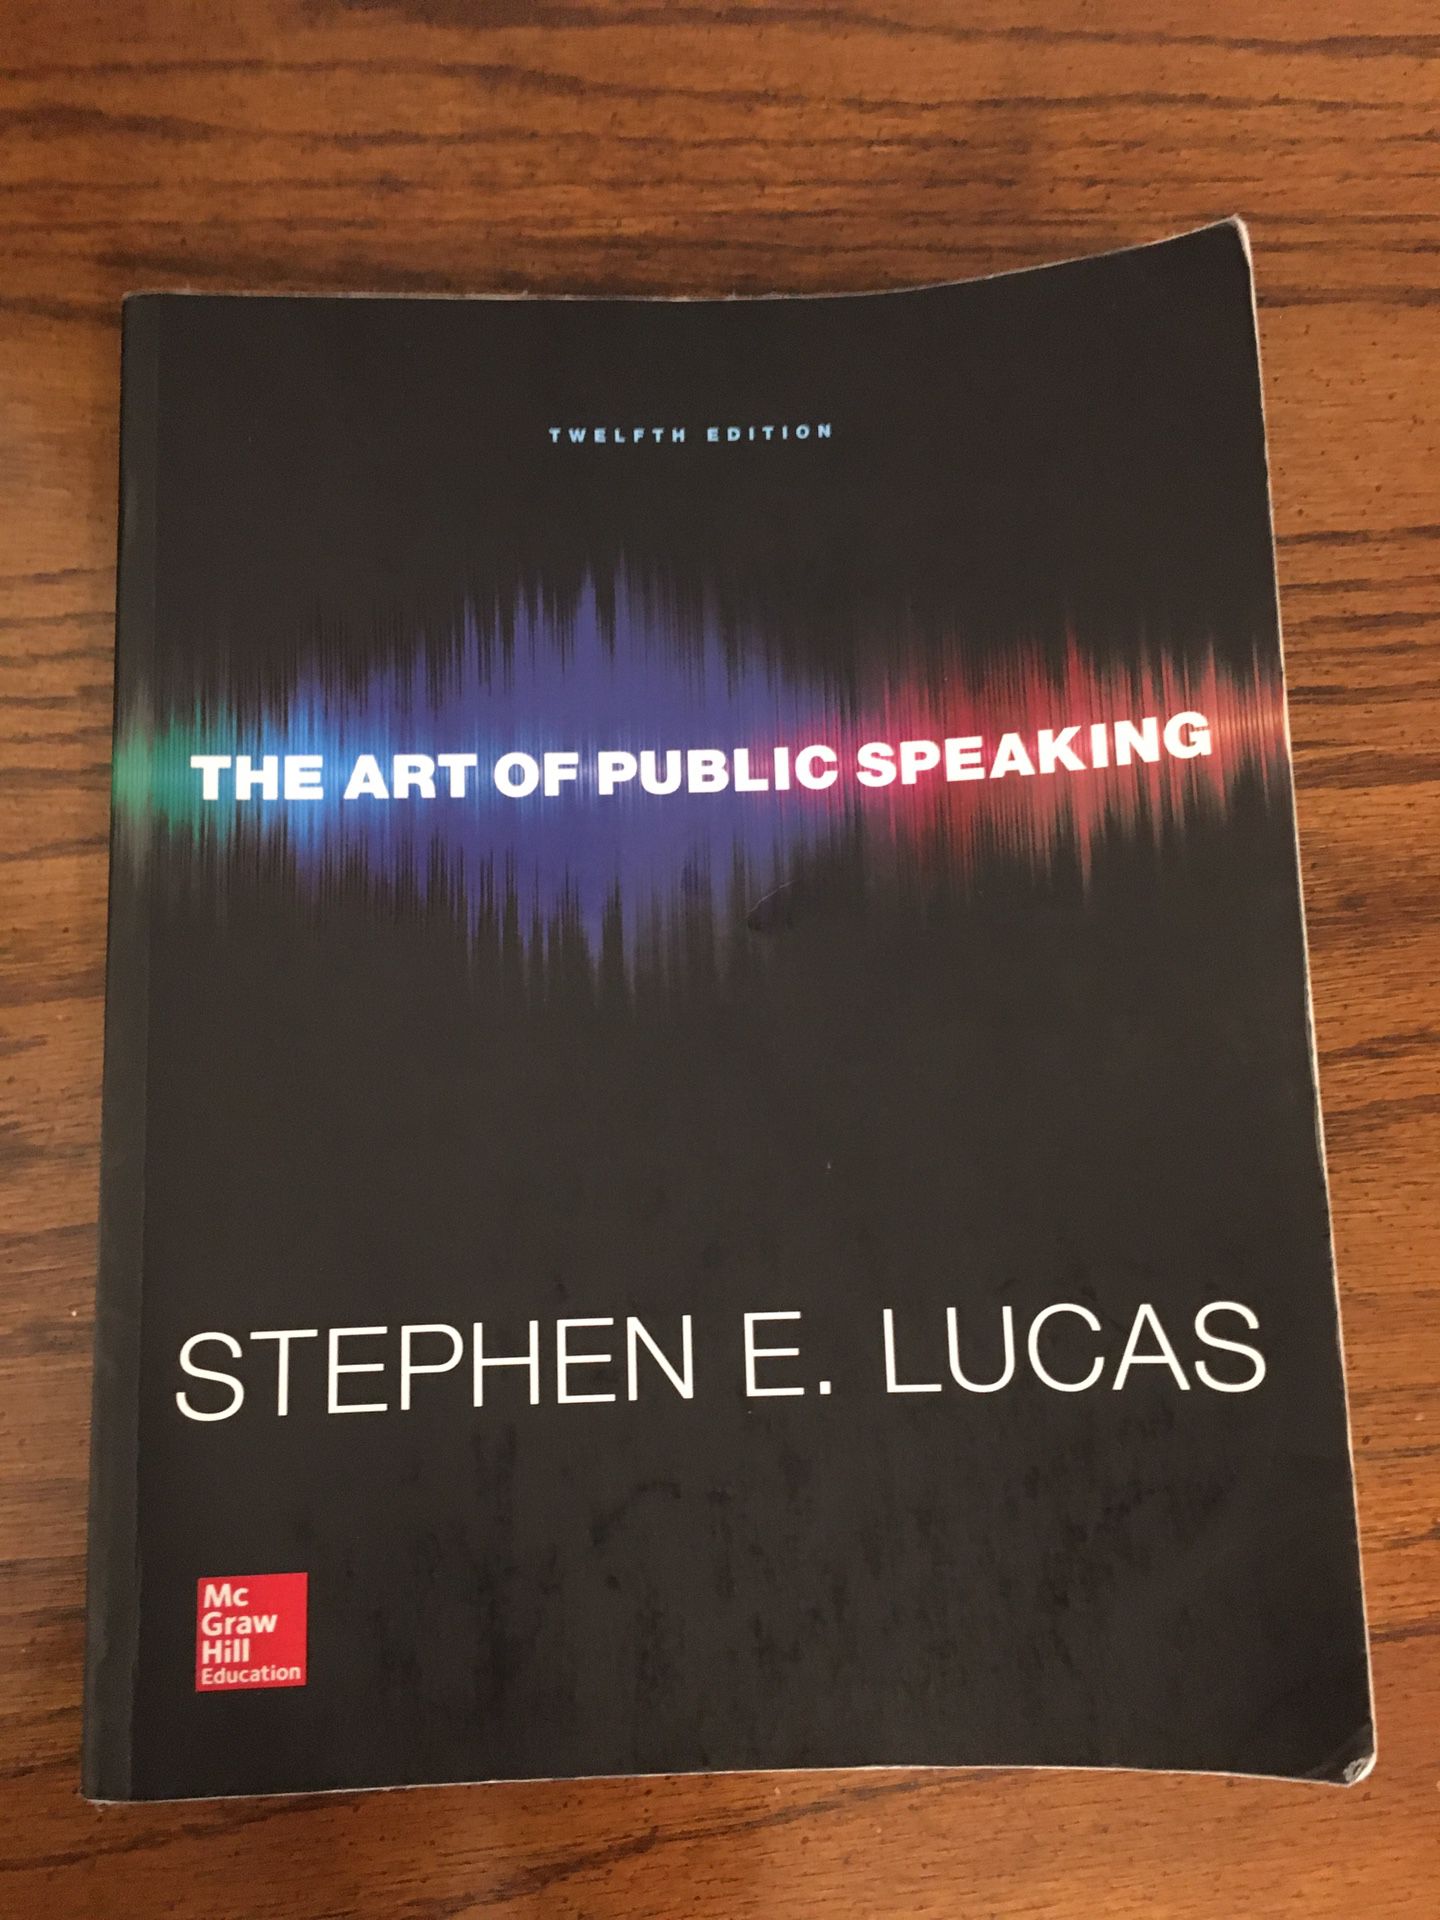 The Art of public Speaking (comunication) standalone